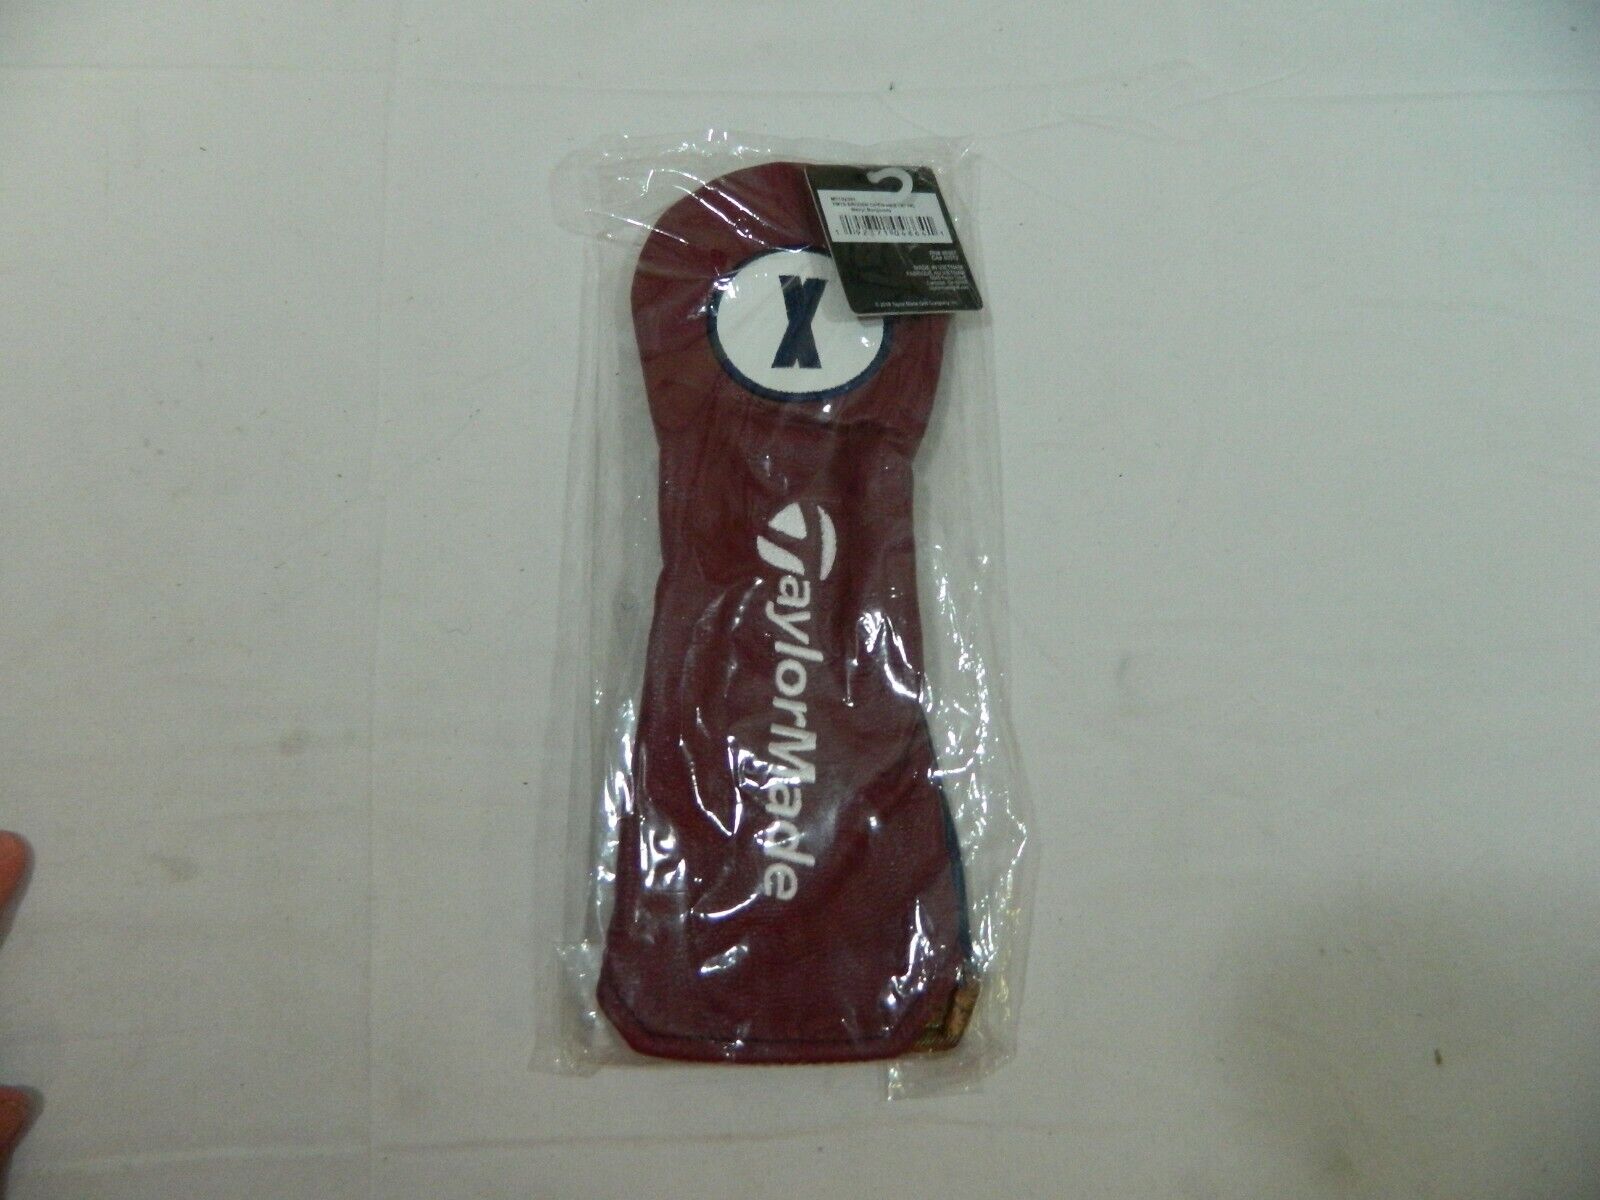 New Taylormade Limited Edition British Open Hybrid Utility Club Headcover